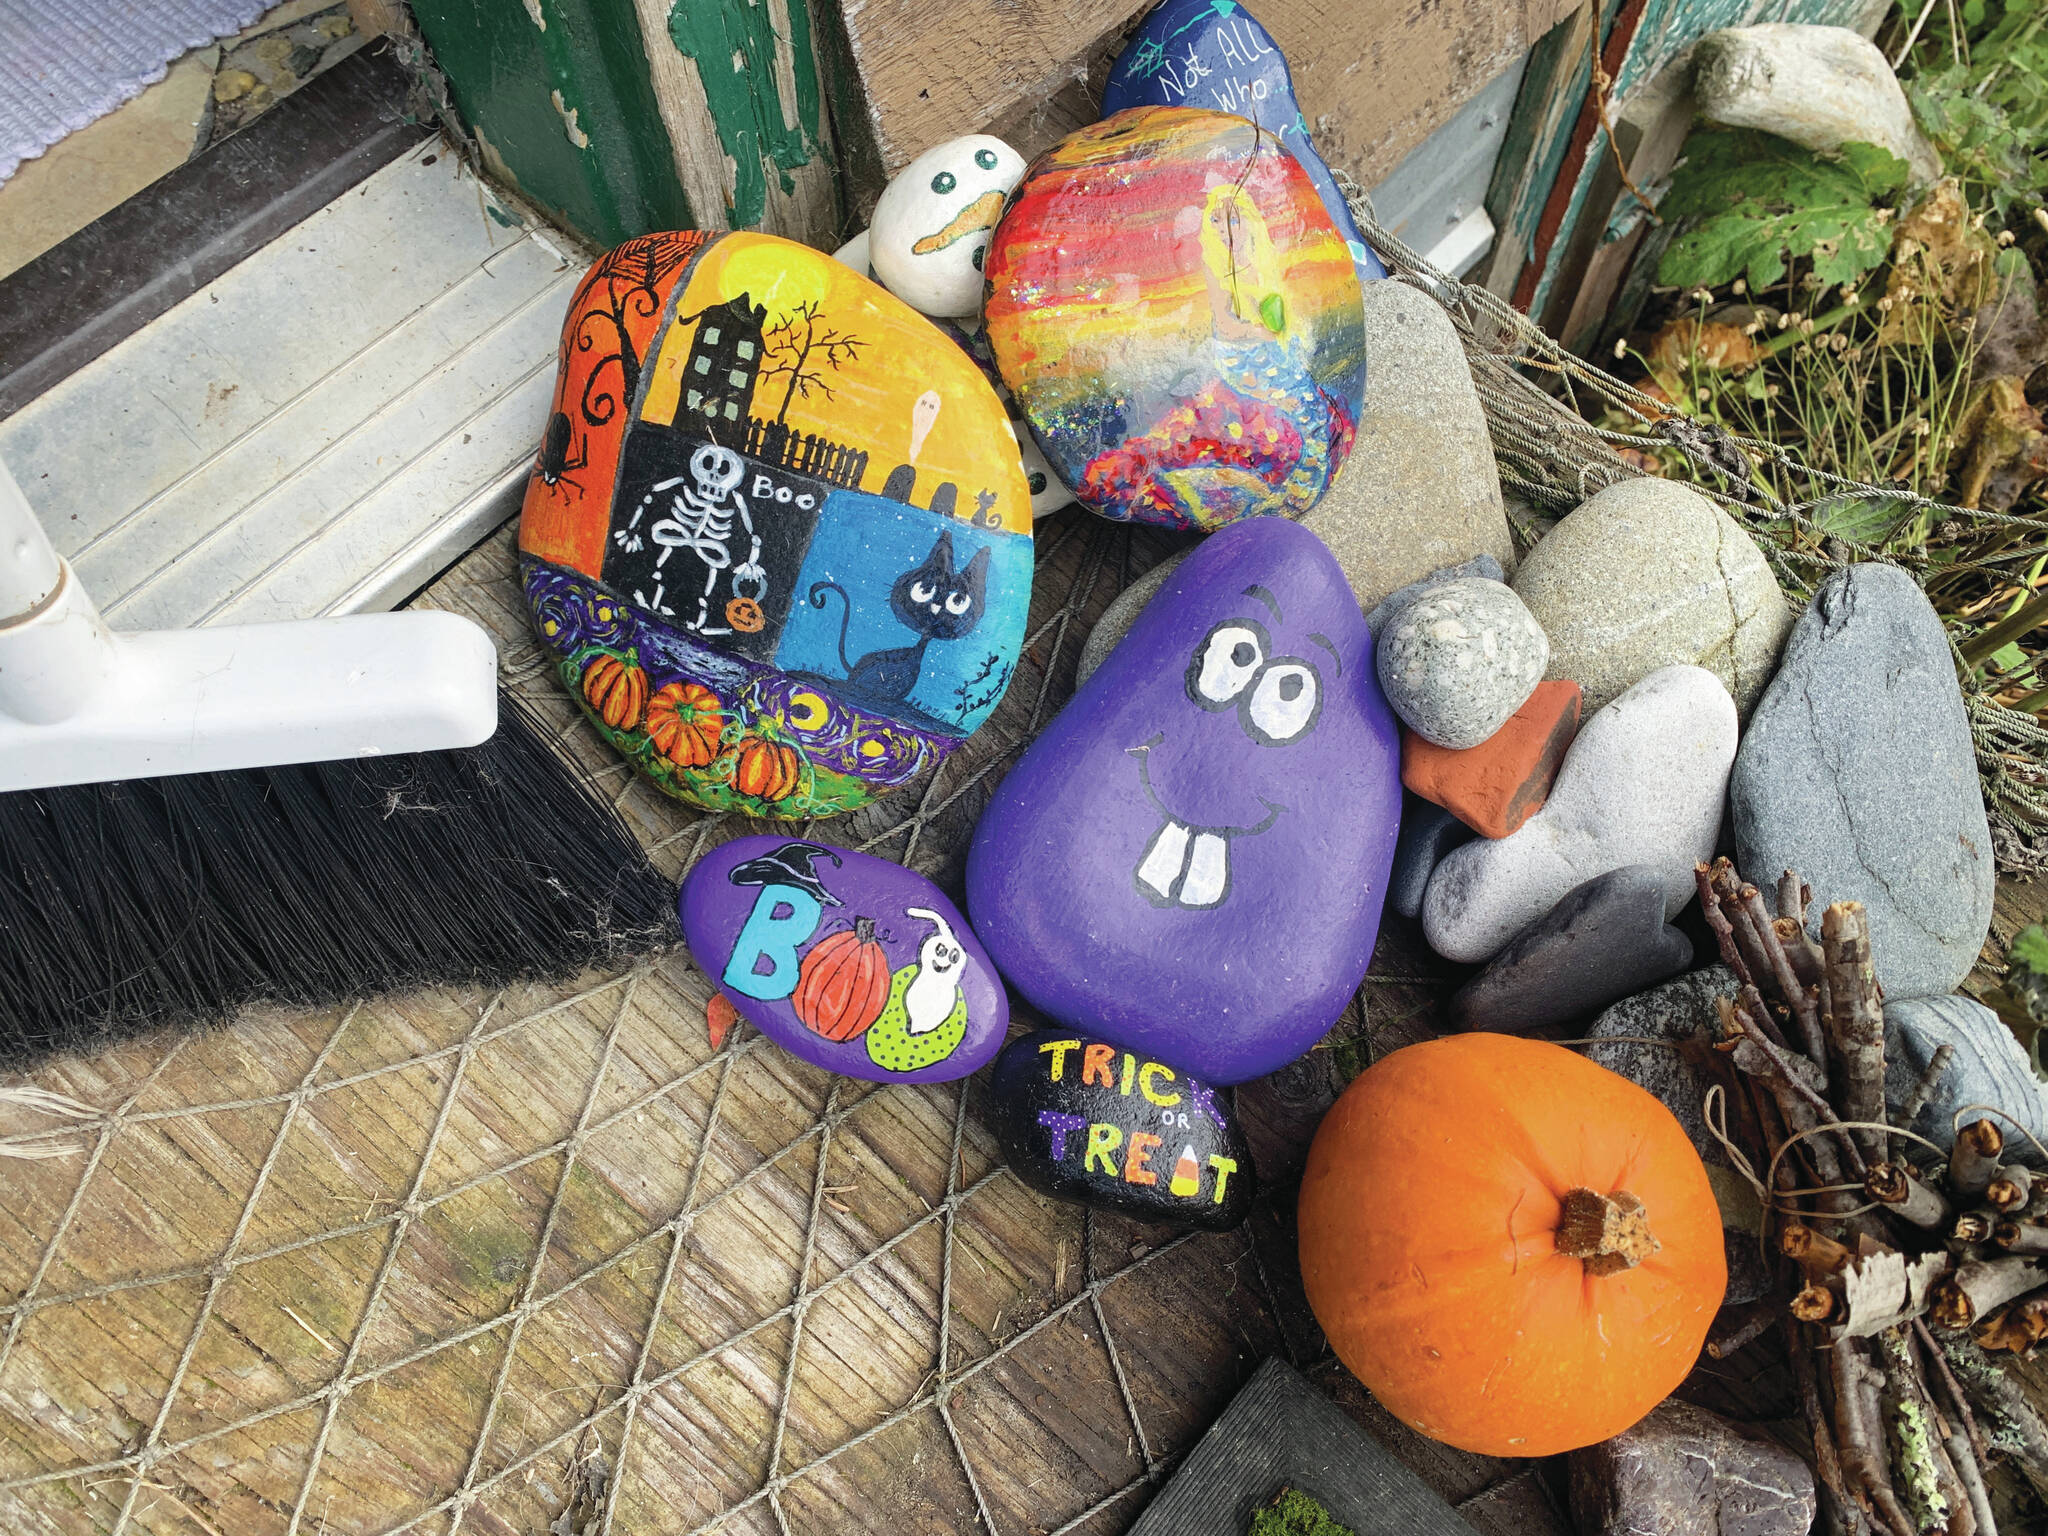 A festive doorway includes a pumpkin, broom and painted rocks by Homer Rocks and Anchorage rocks members, photo by Christina Whiting